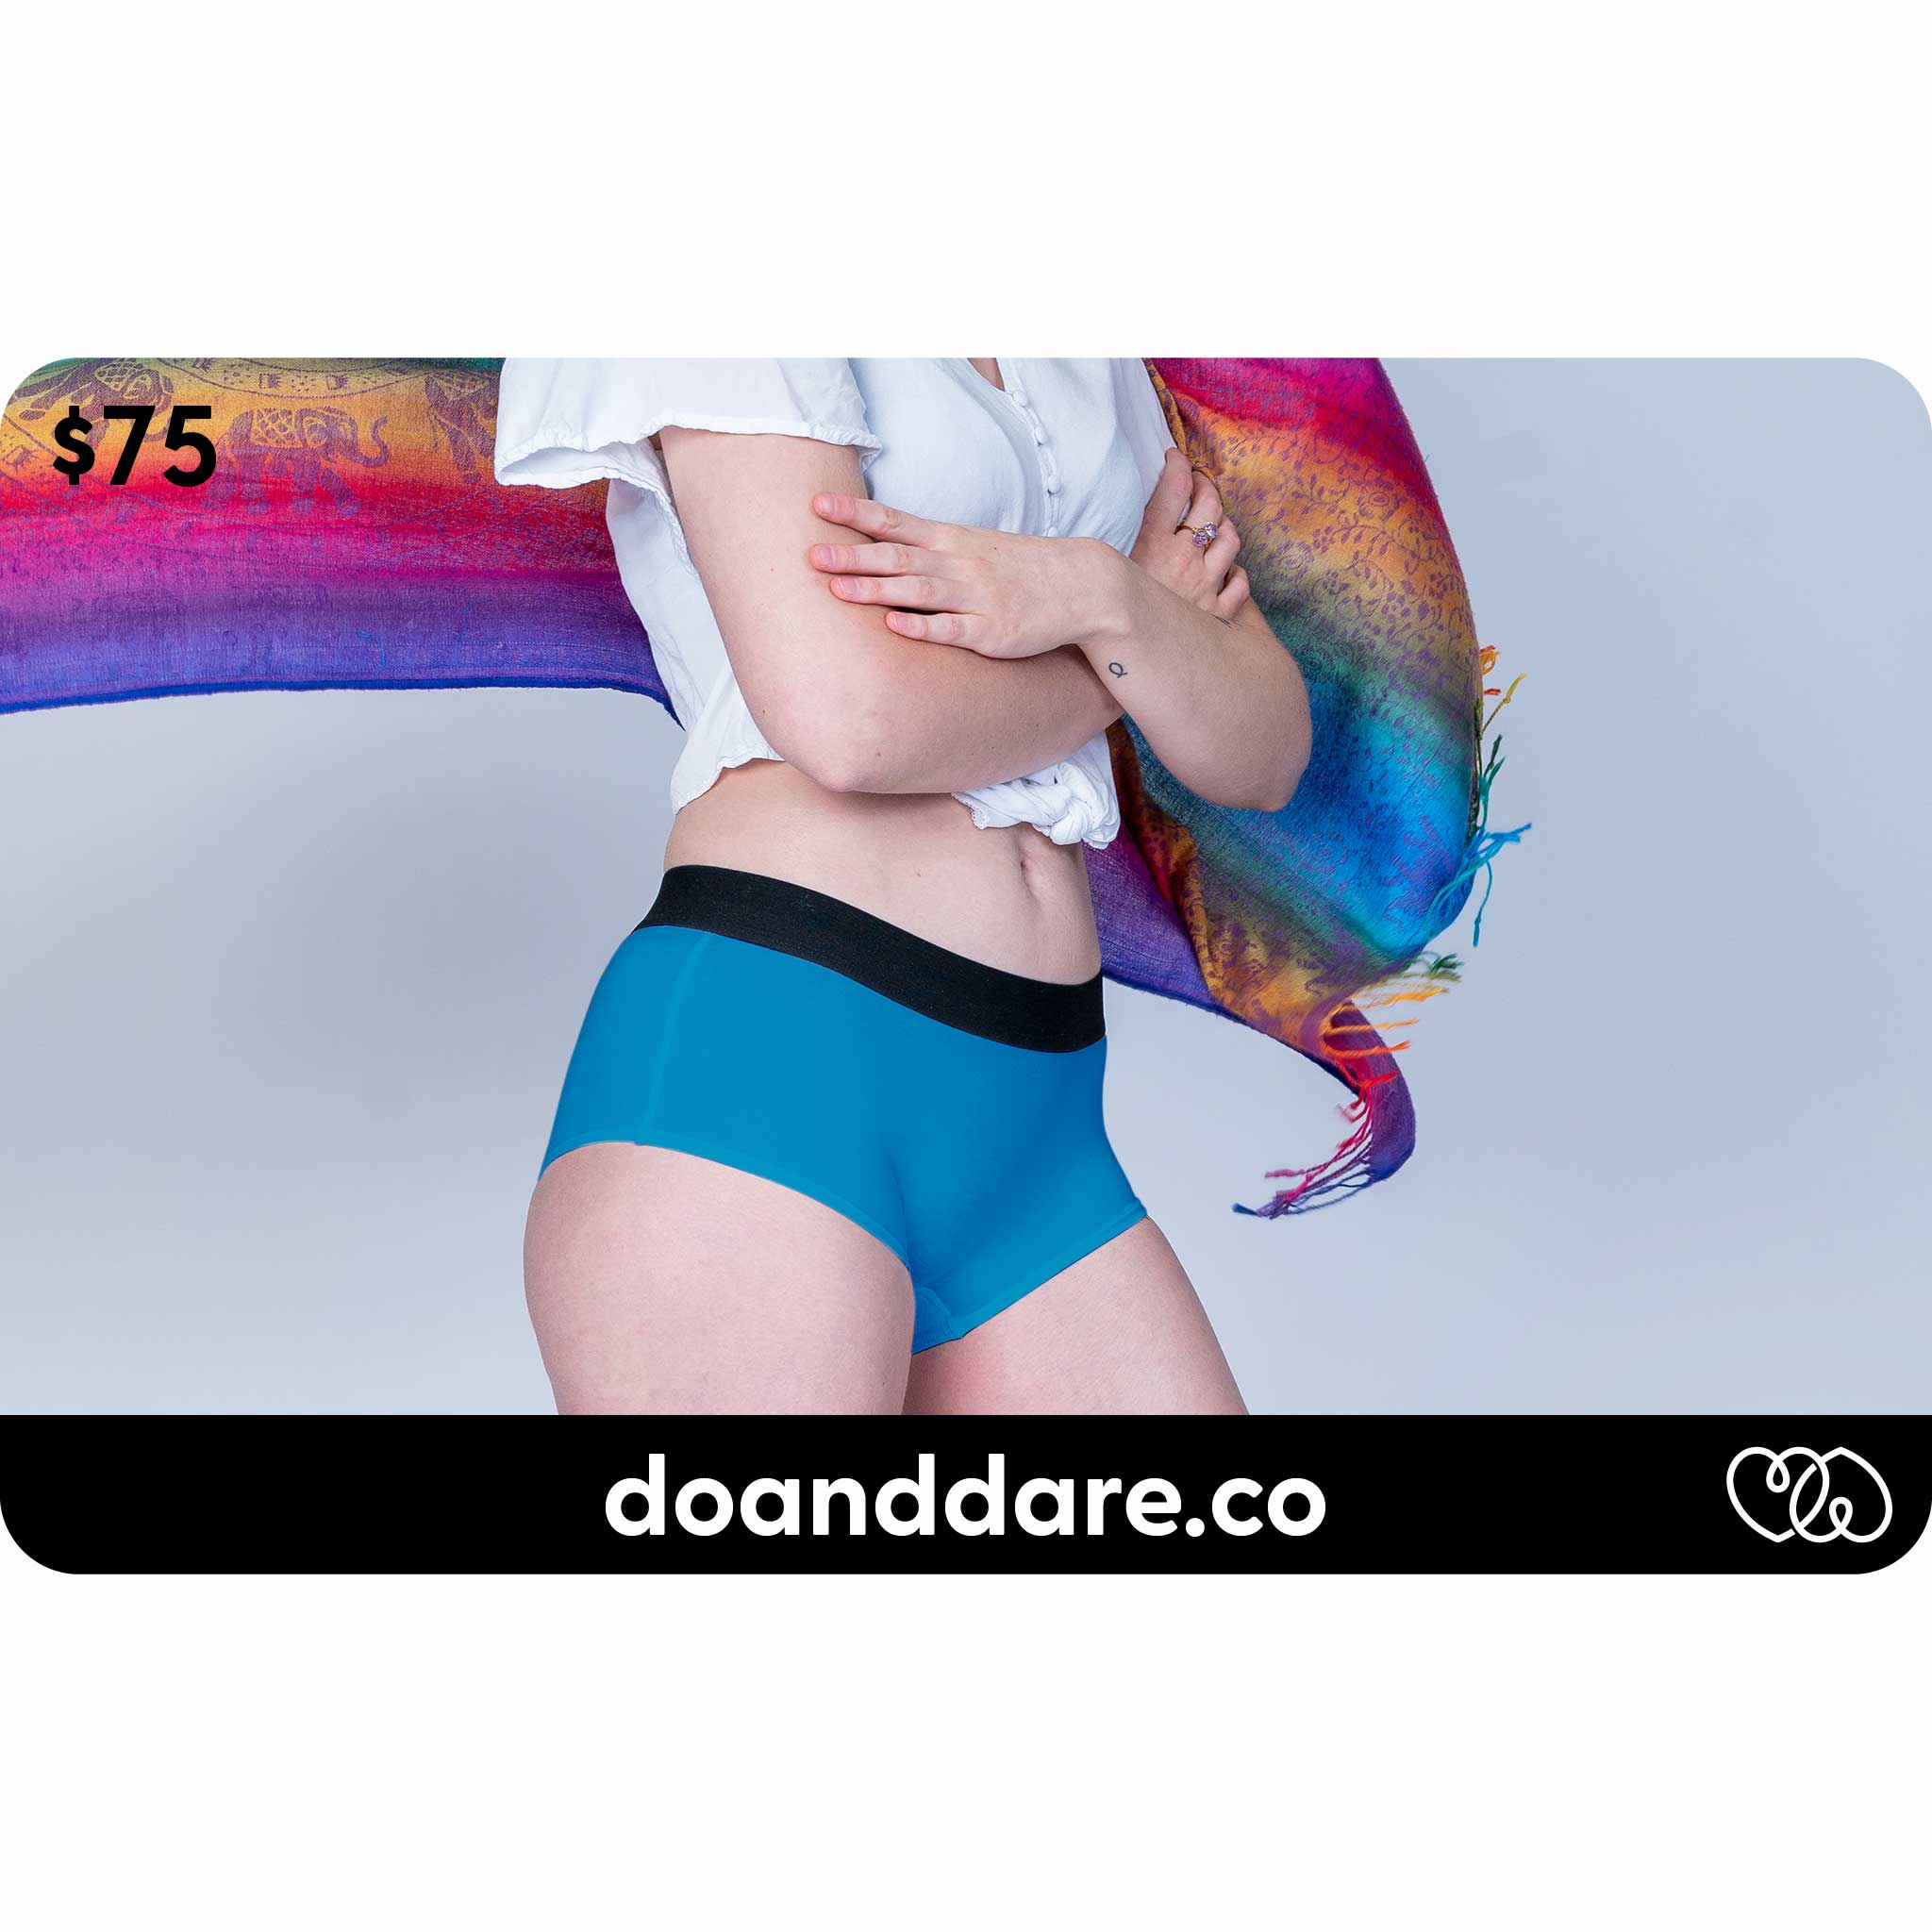 do+dare undie co. - $75 gift card showing sarah wearing electric blue boyshort underwear with a rainbow scarf in the background